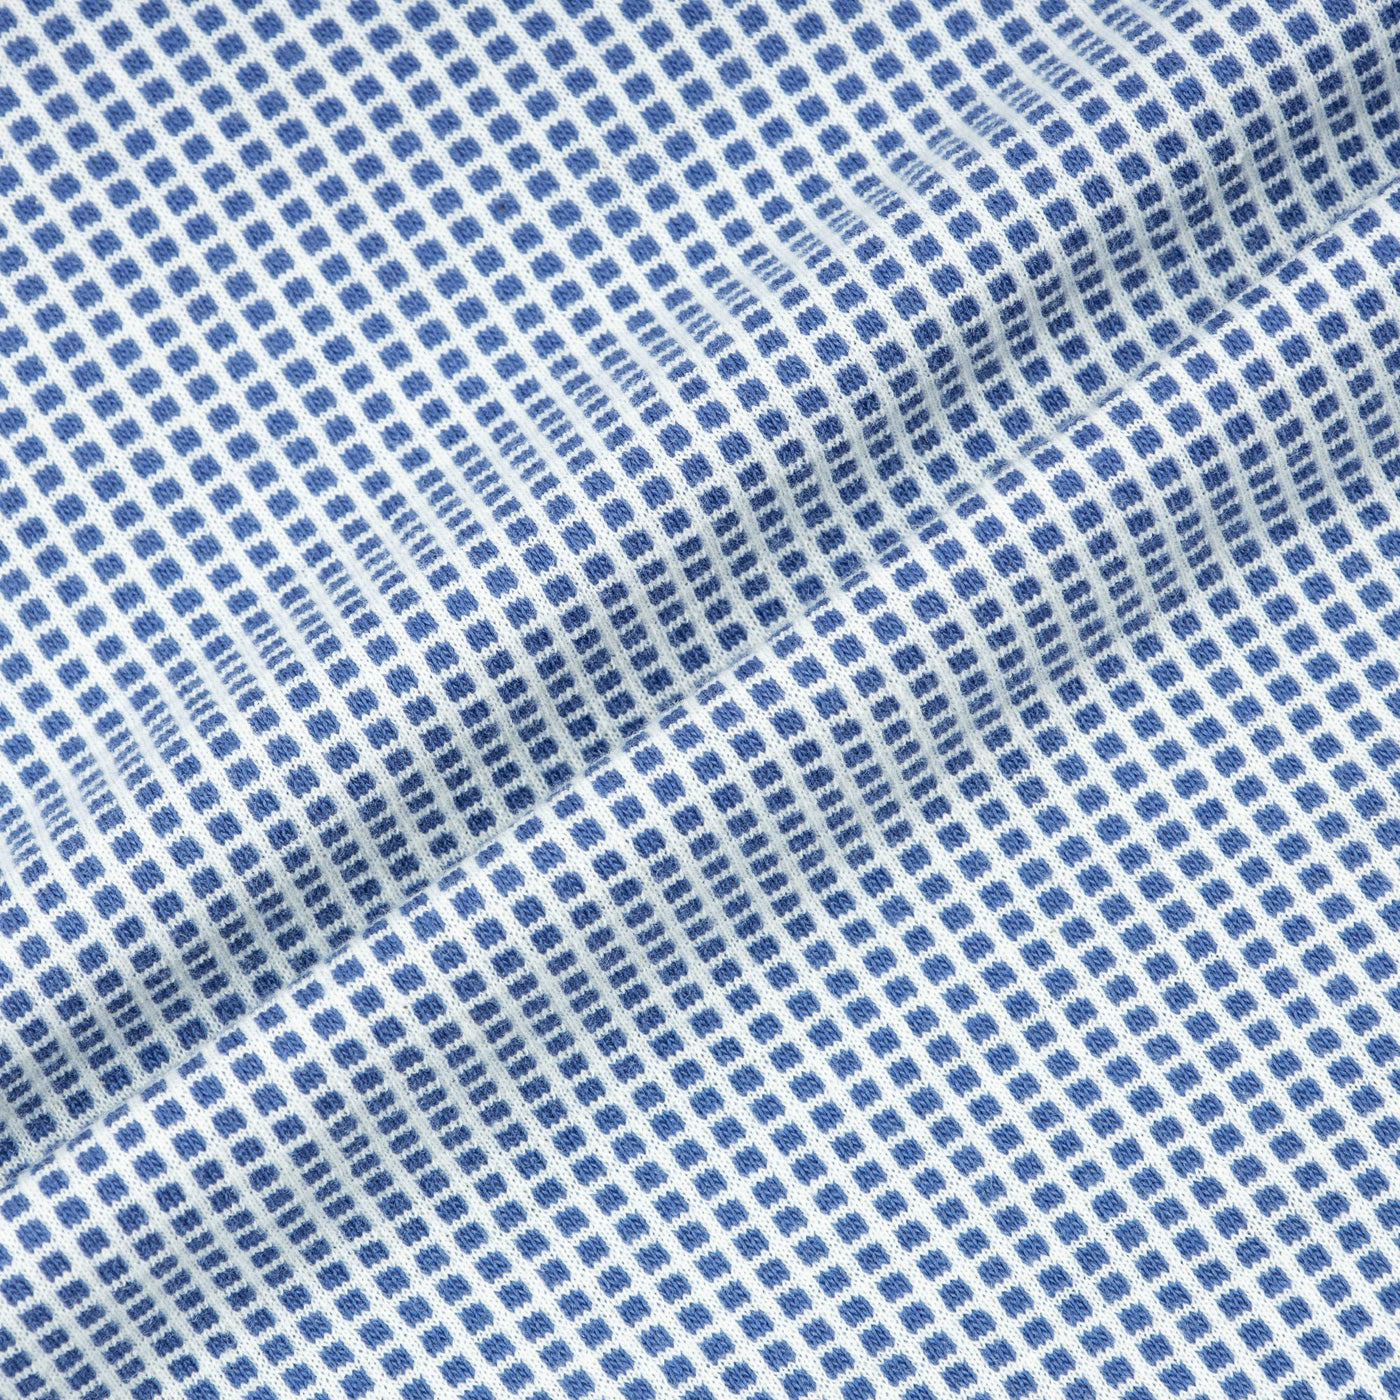 Jacquard Checked Knitted White & Blue Cotton Polo